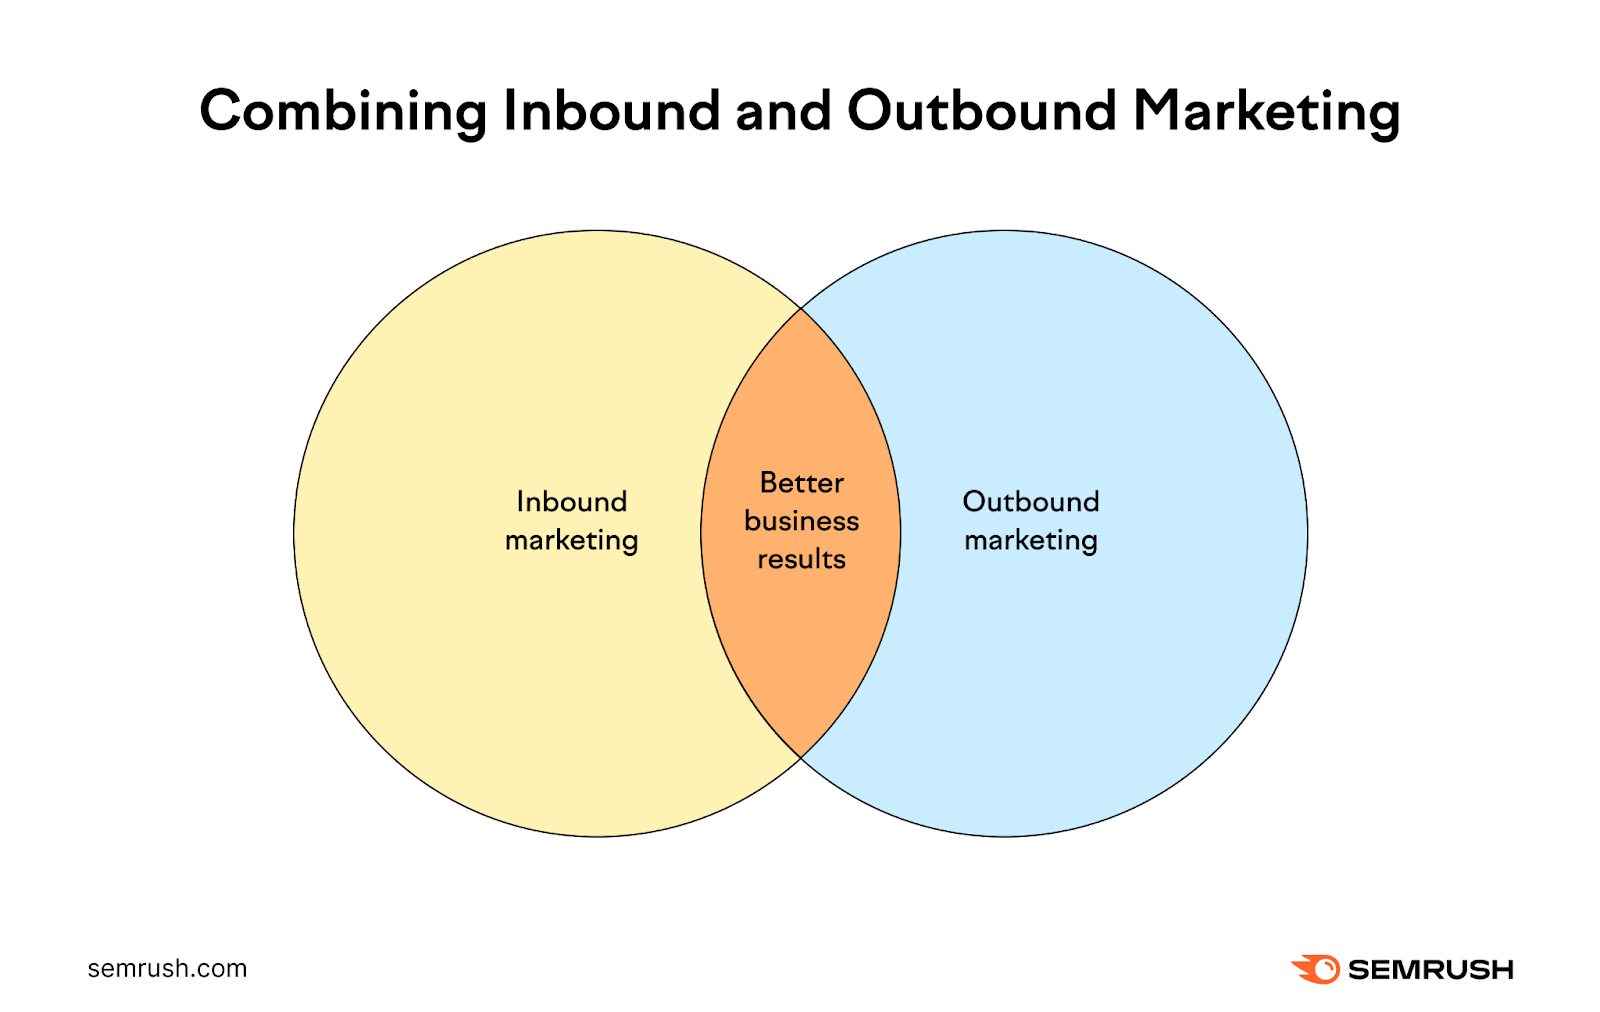 An infographic showing that combining inbound and outbound marketing brings better business results